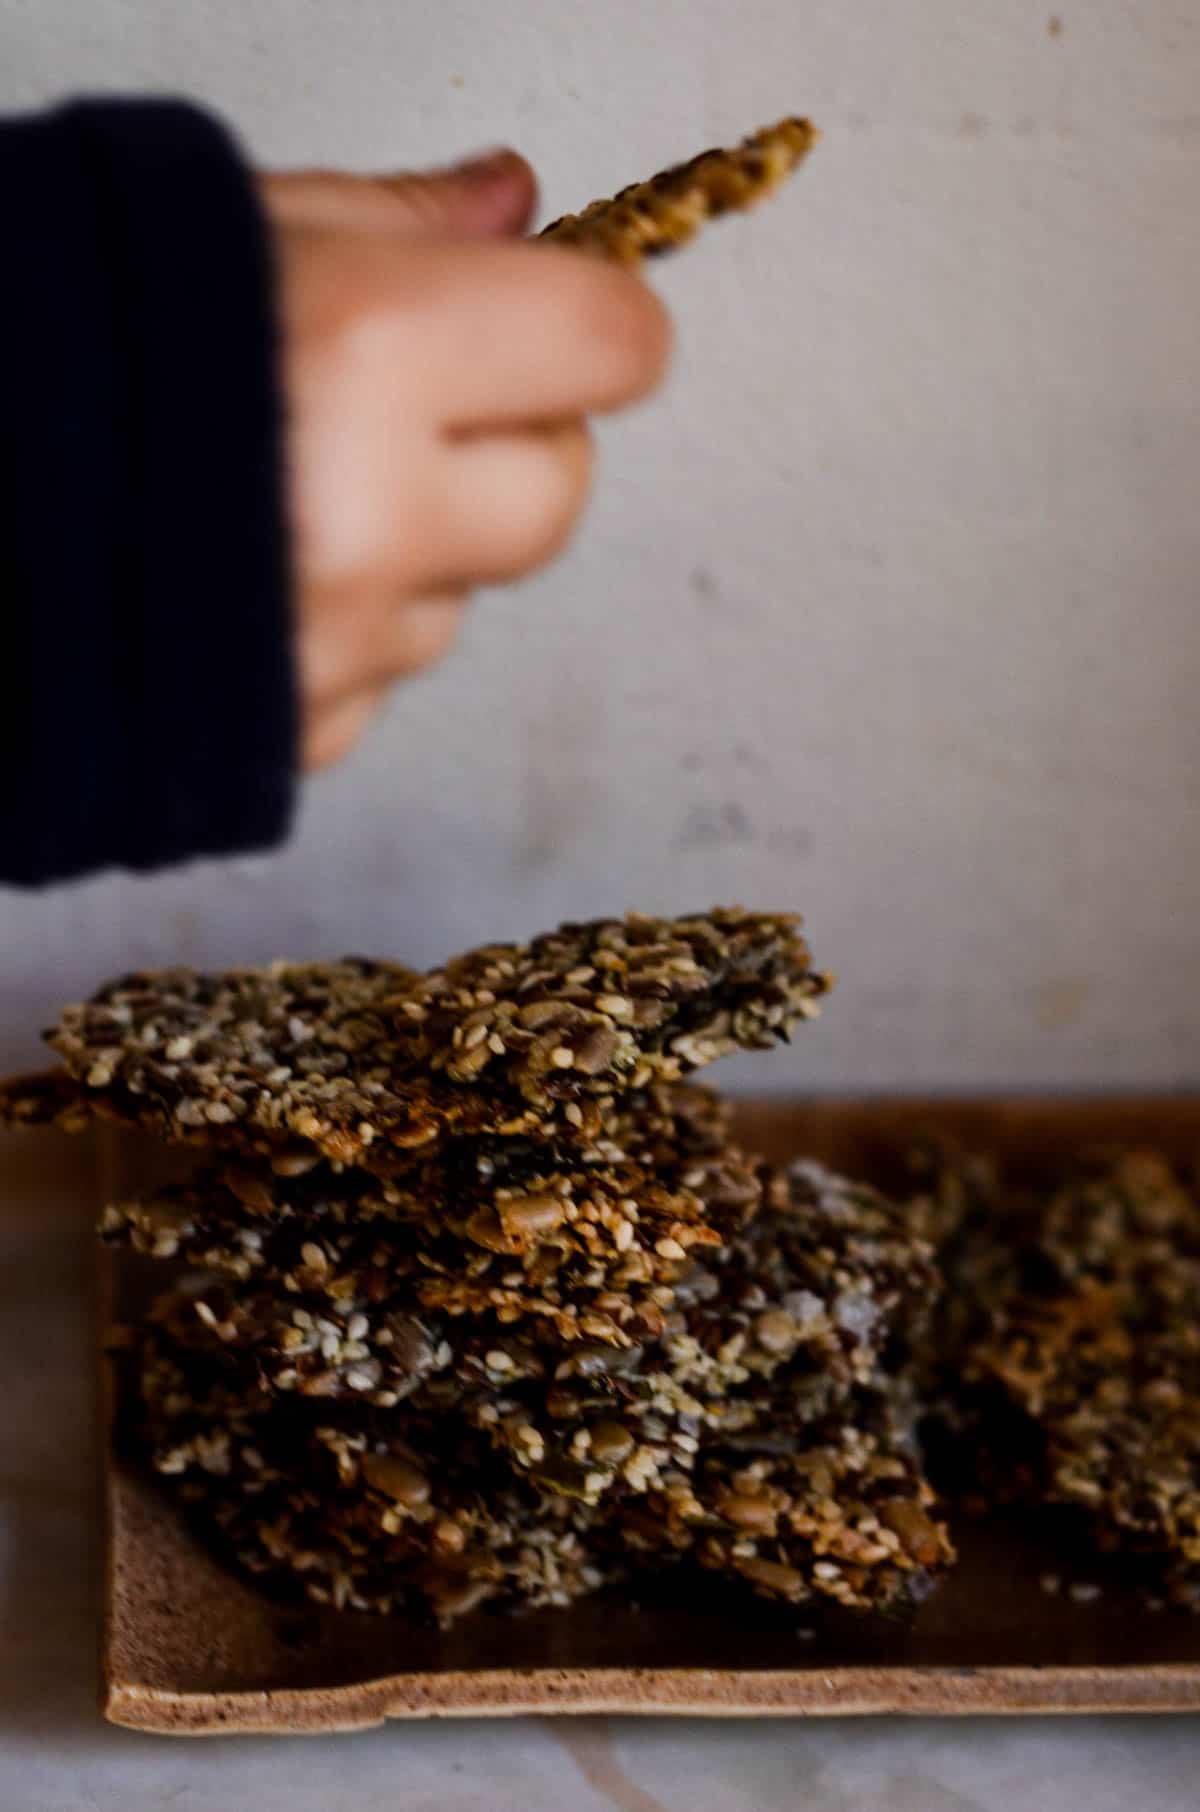 Reaching for a stack of multi seed crackers.